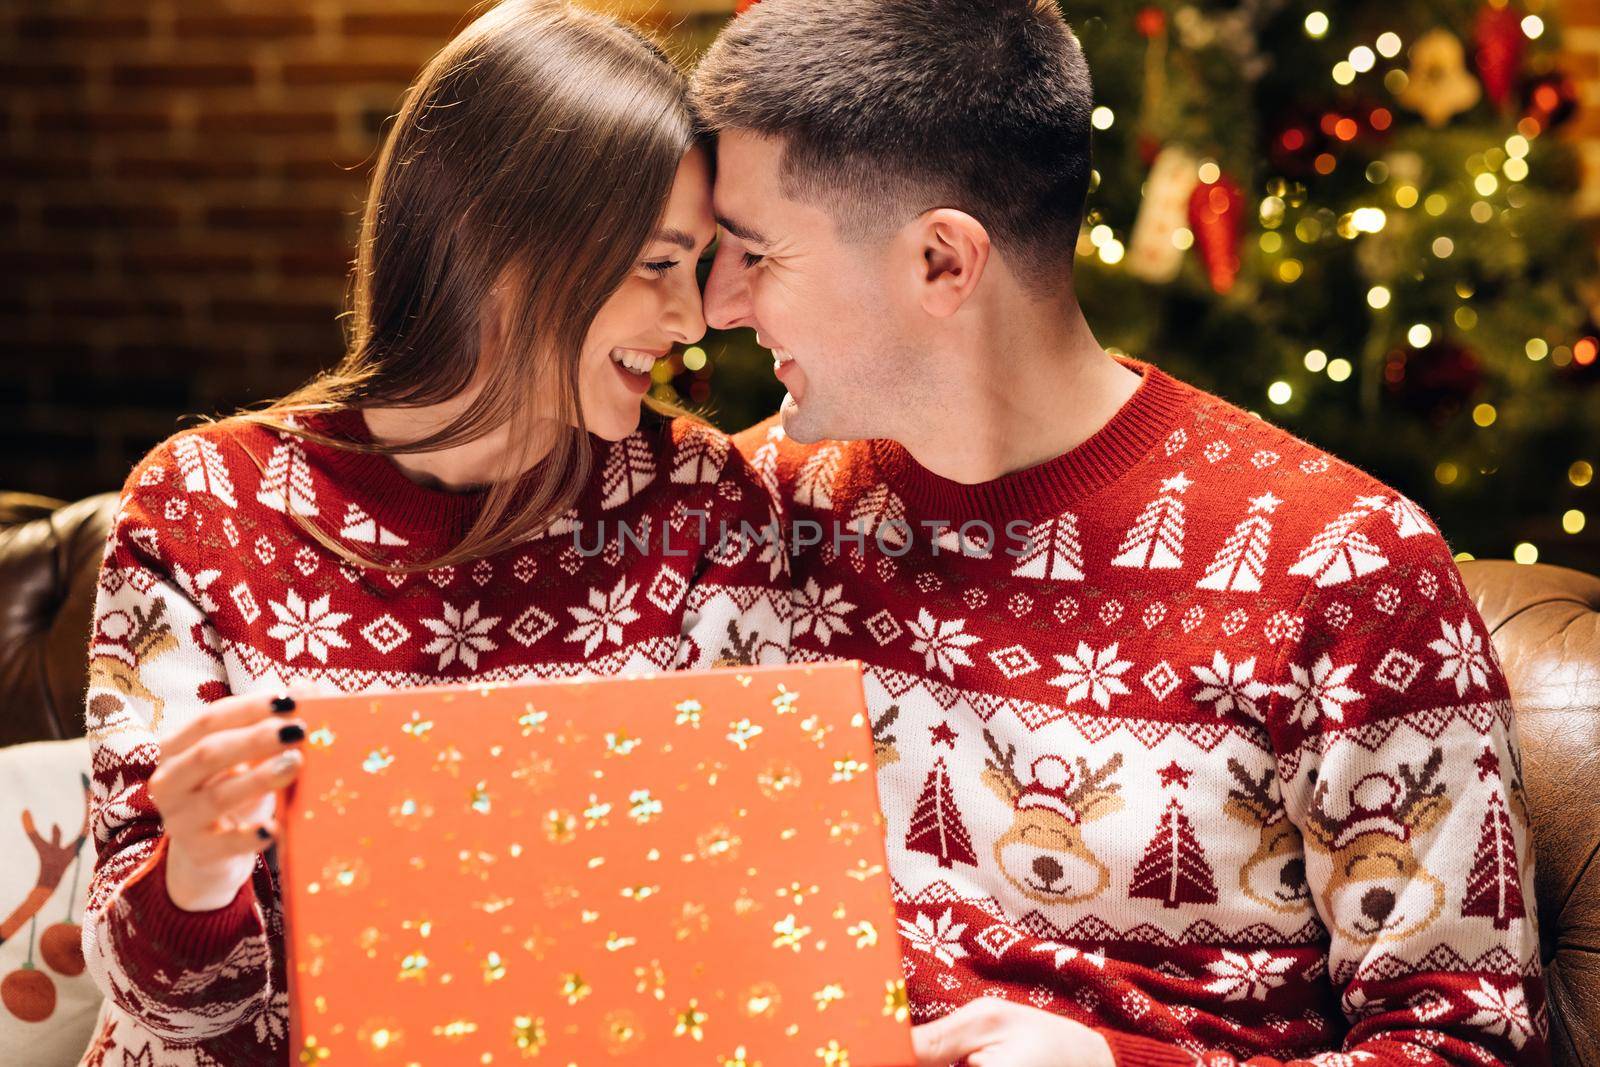 Concept of holidays, romance, surprise. Happy man is making christmas gift to his beloved woman. Portrait of a romantic couple opening a present gift box in the evening near decorated xmas tree.